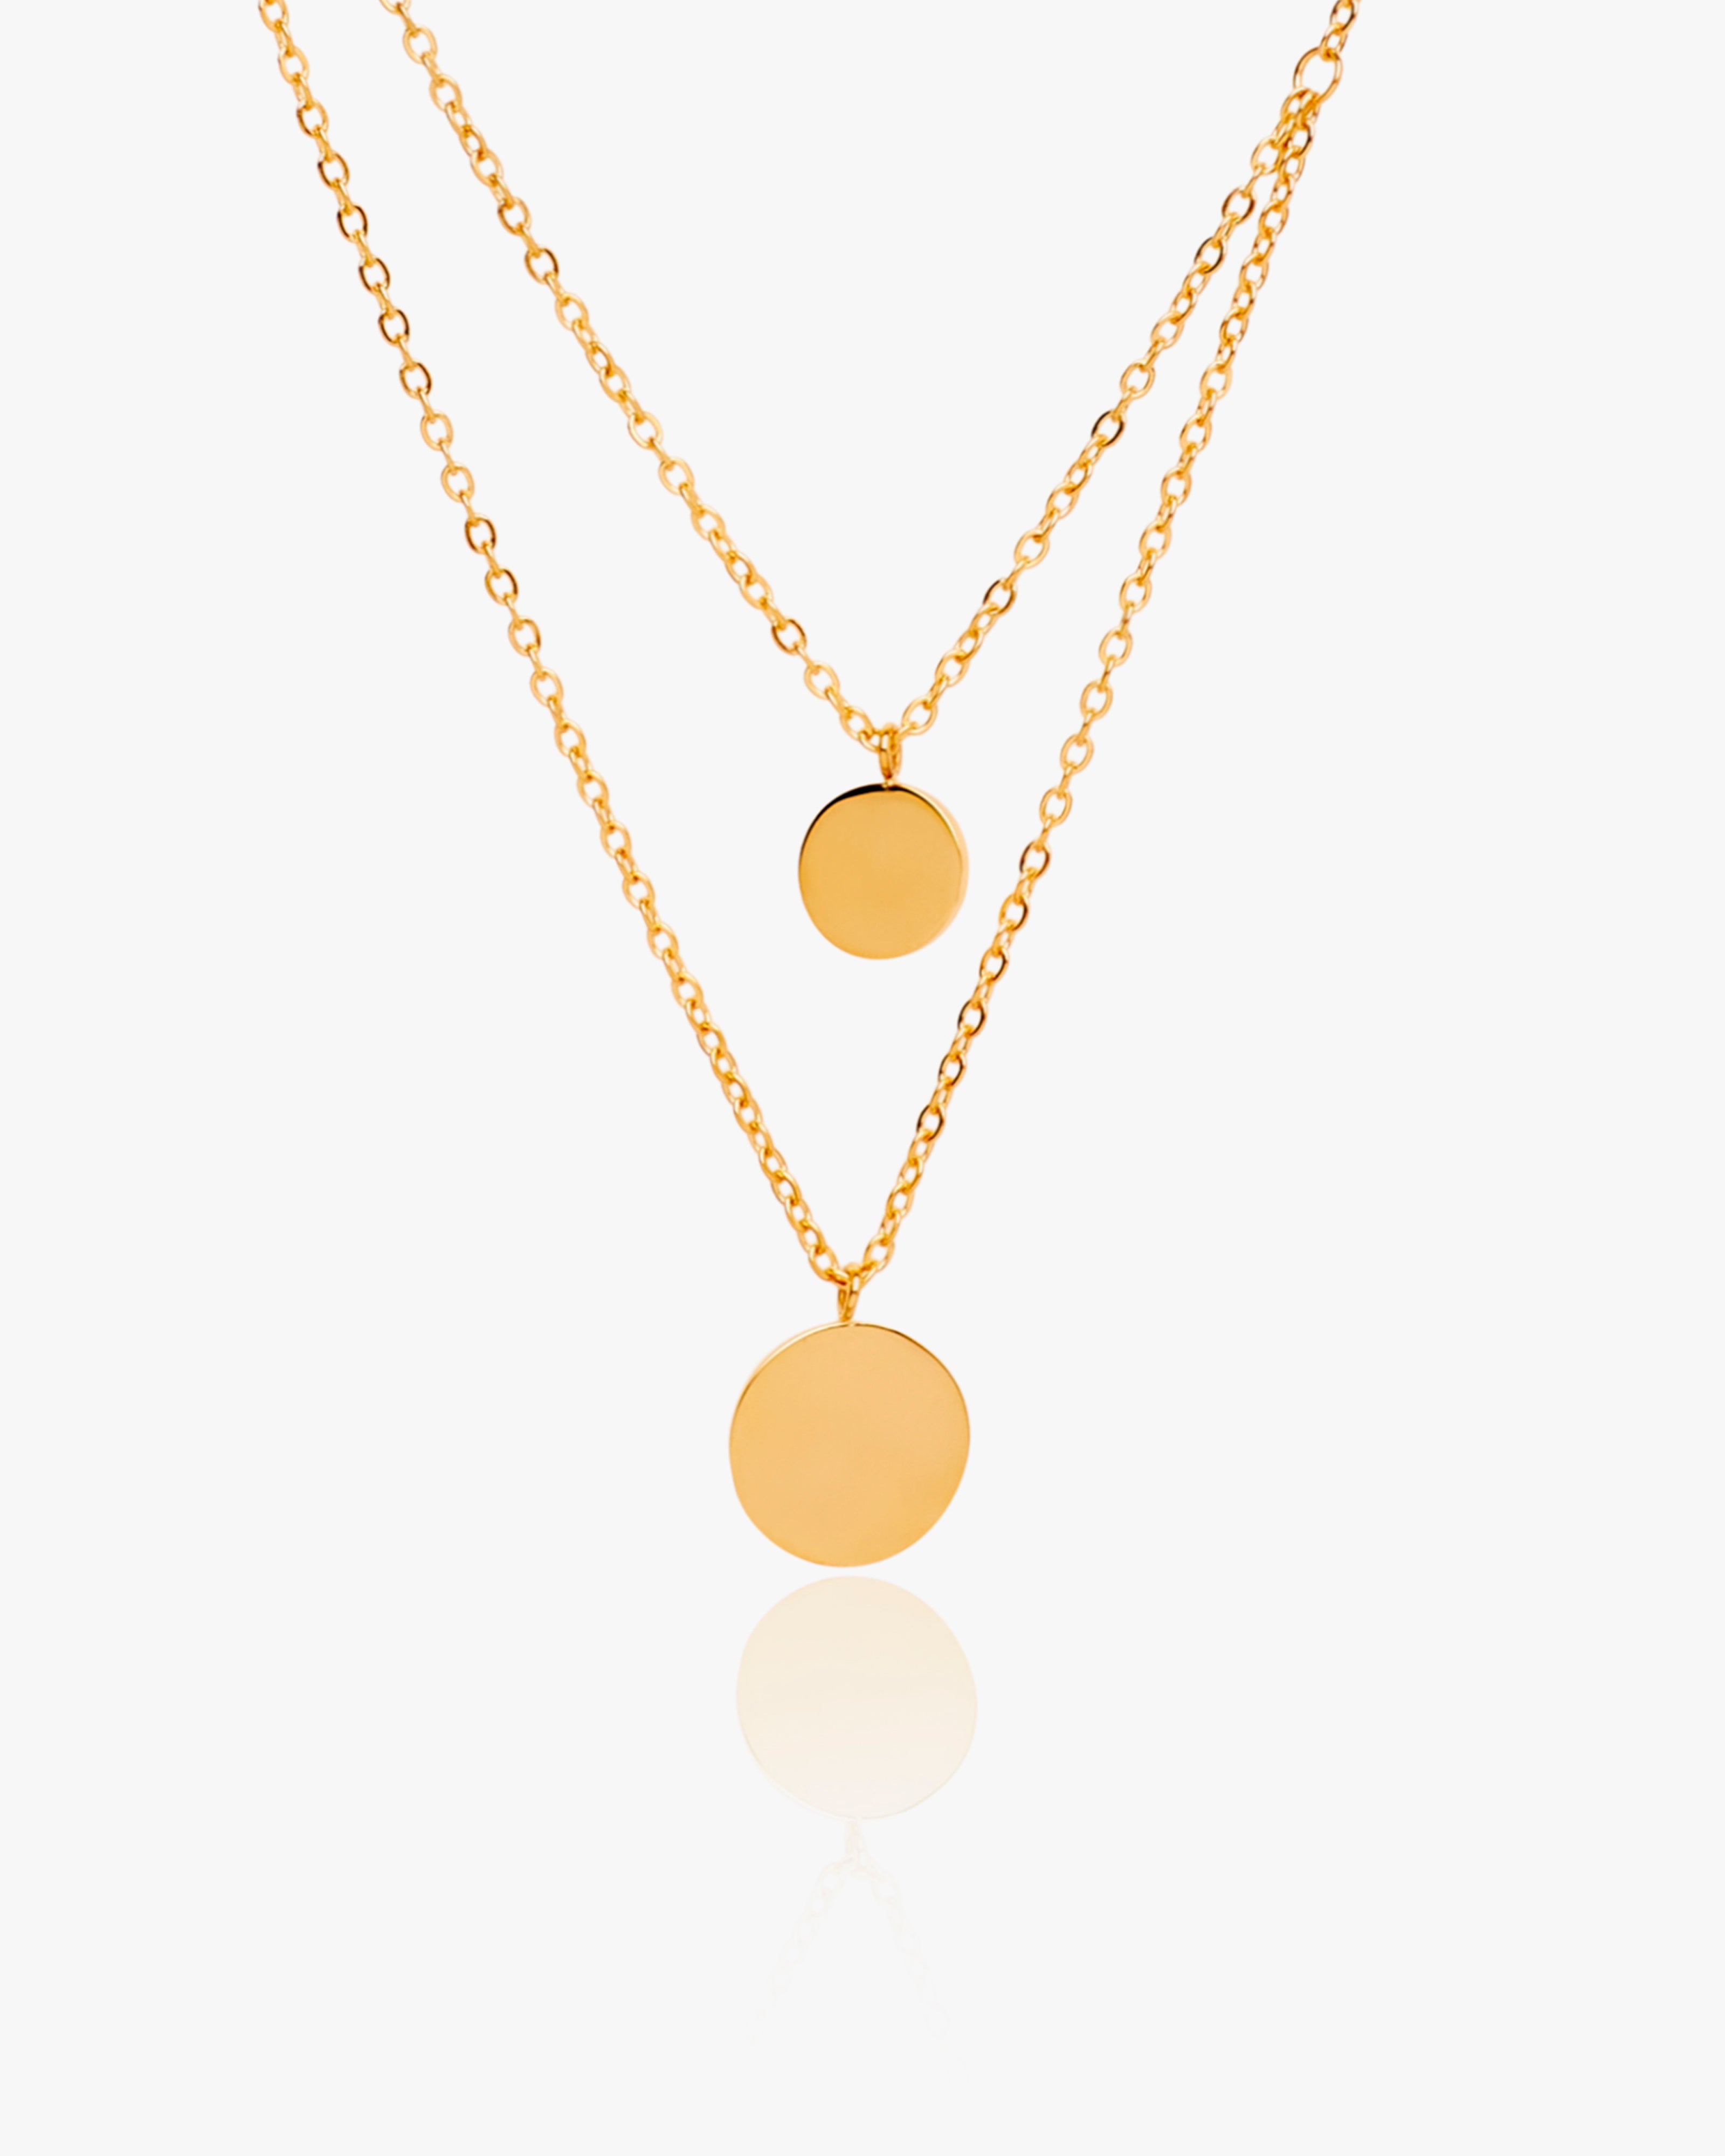 Gold Layered Pendant Necklace